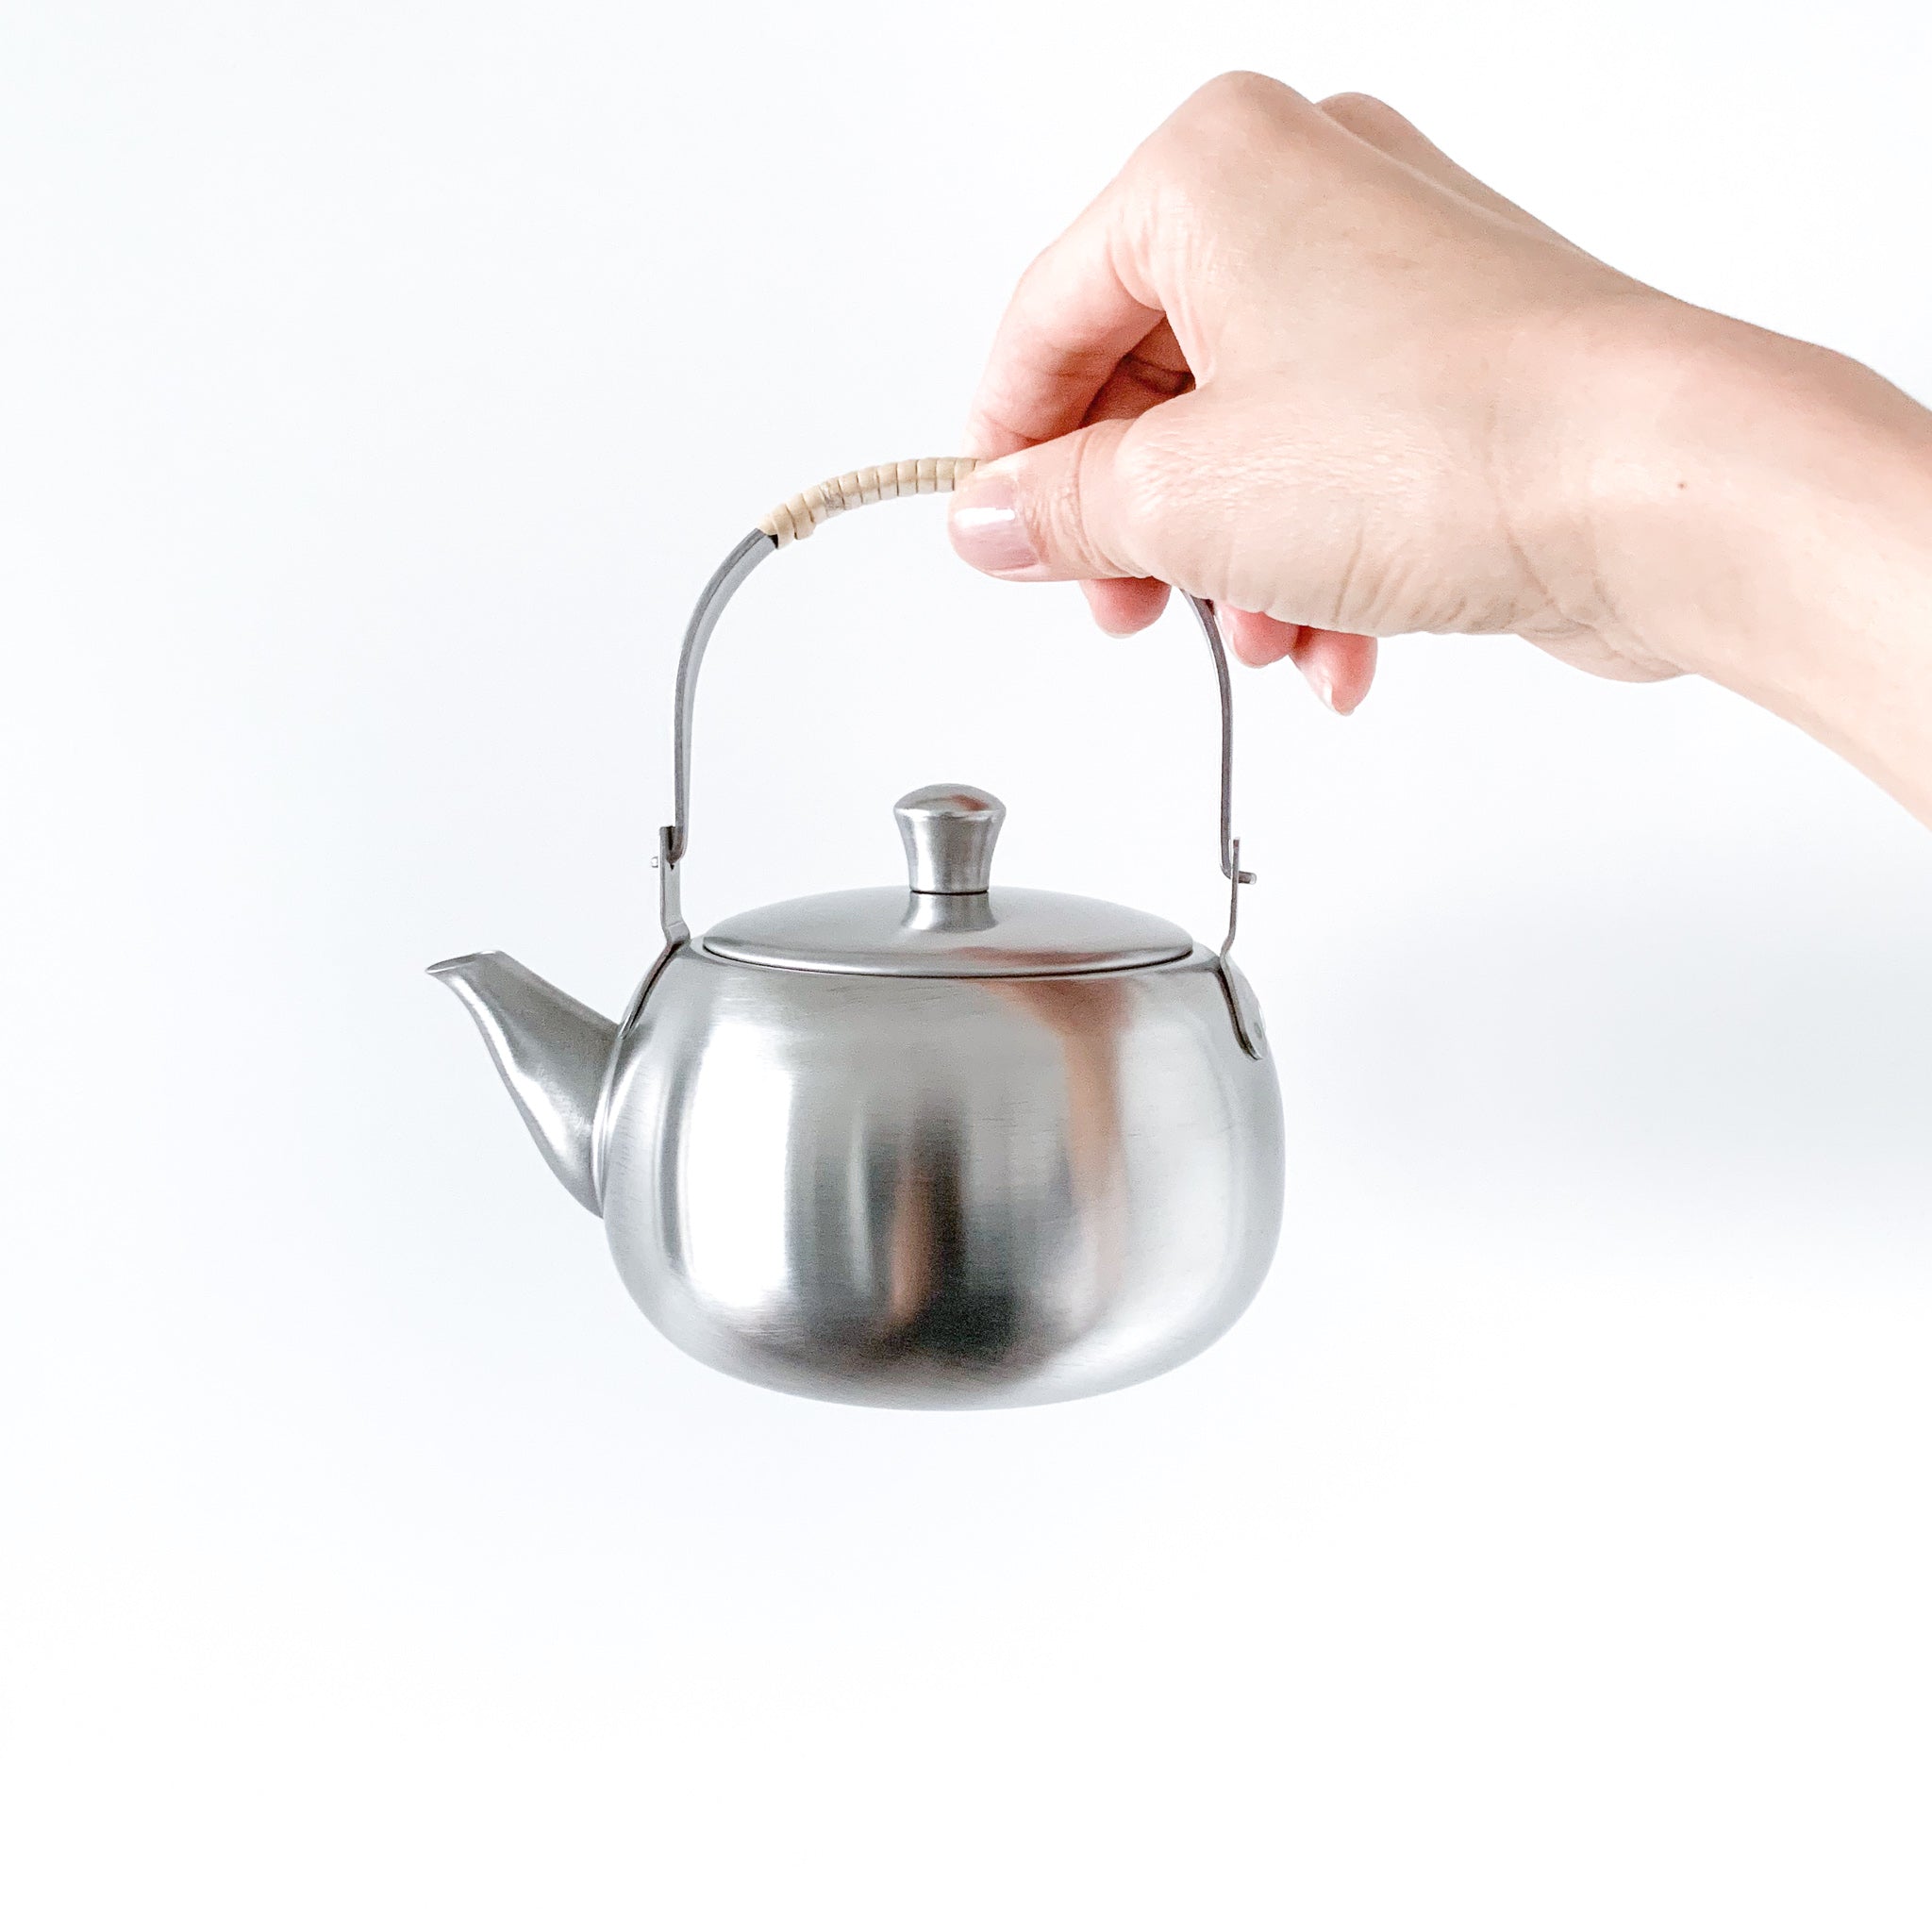 Stainless Steel Teapots Induction  Sanqia Stainless Steel Teapot